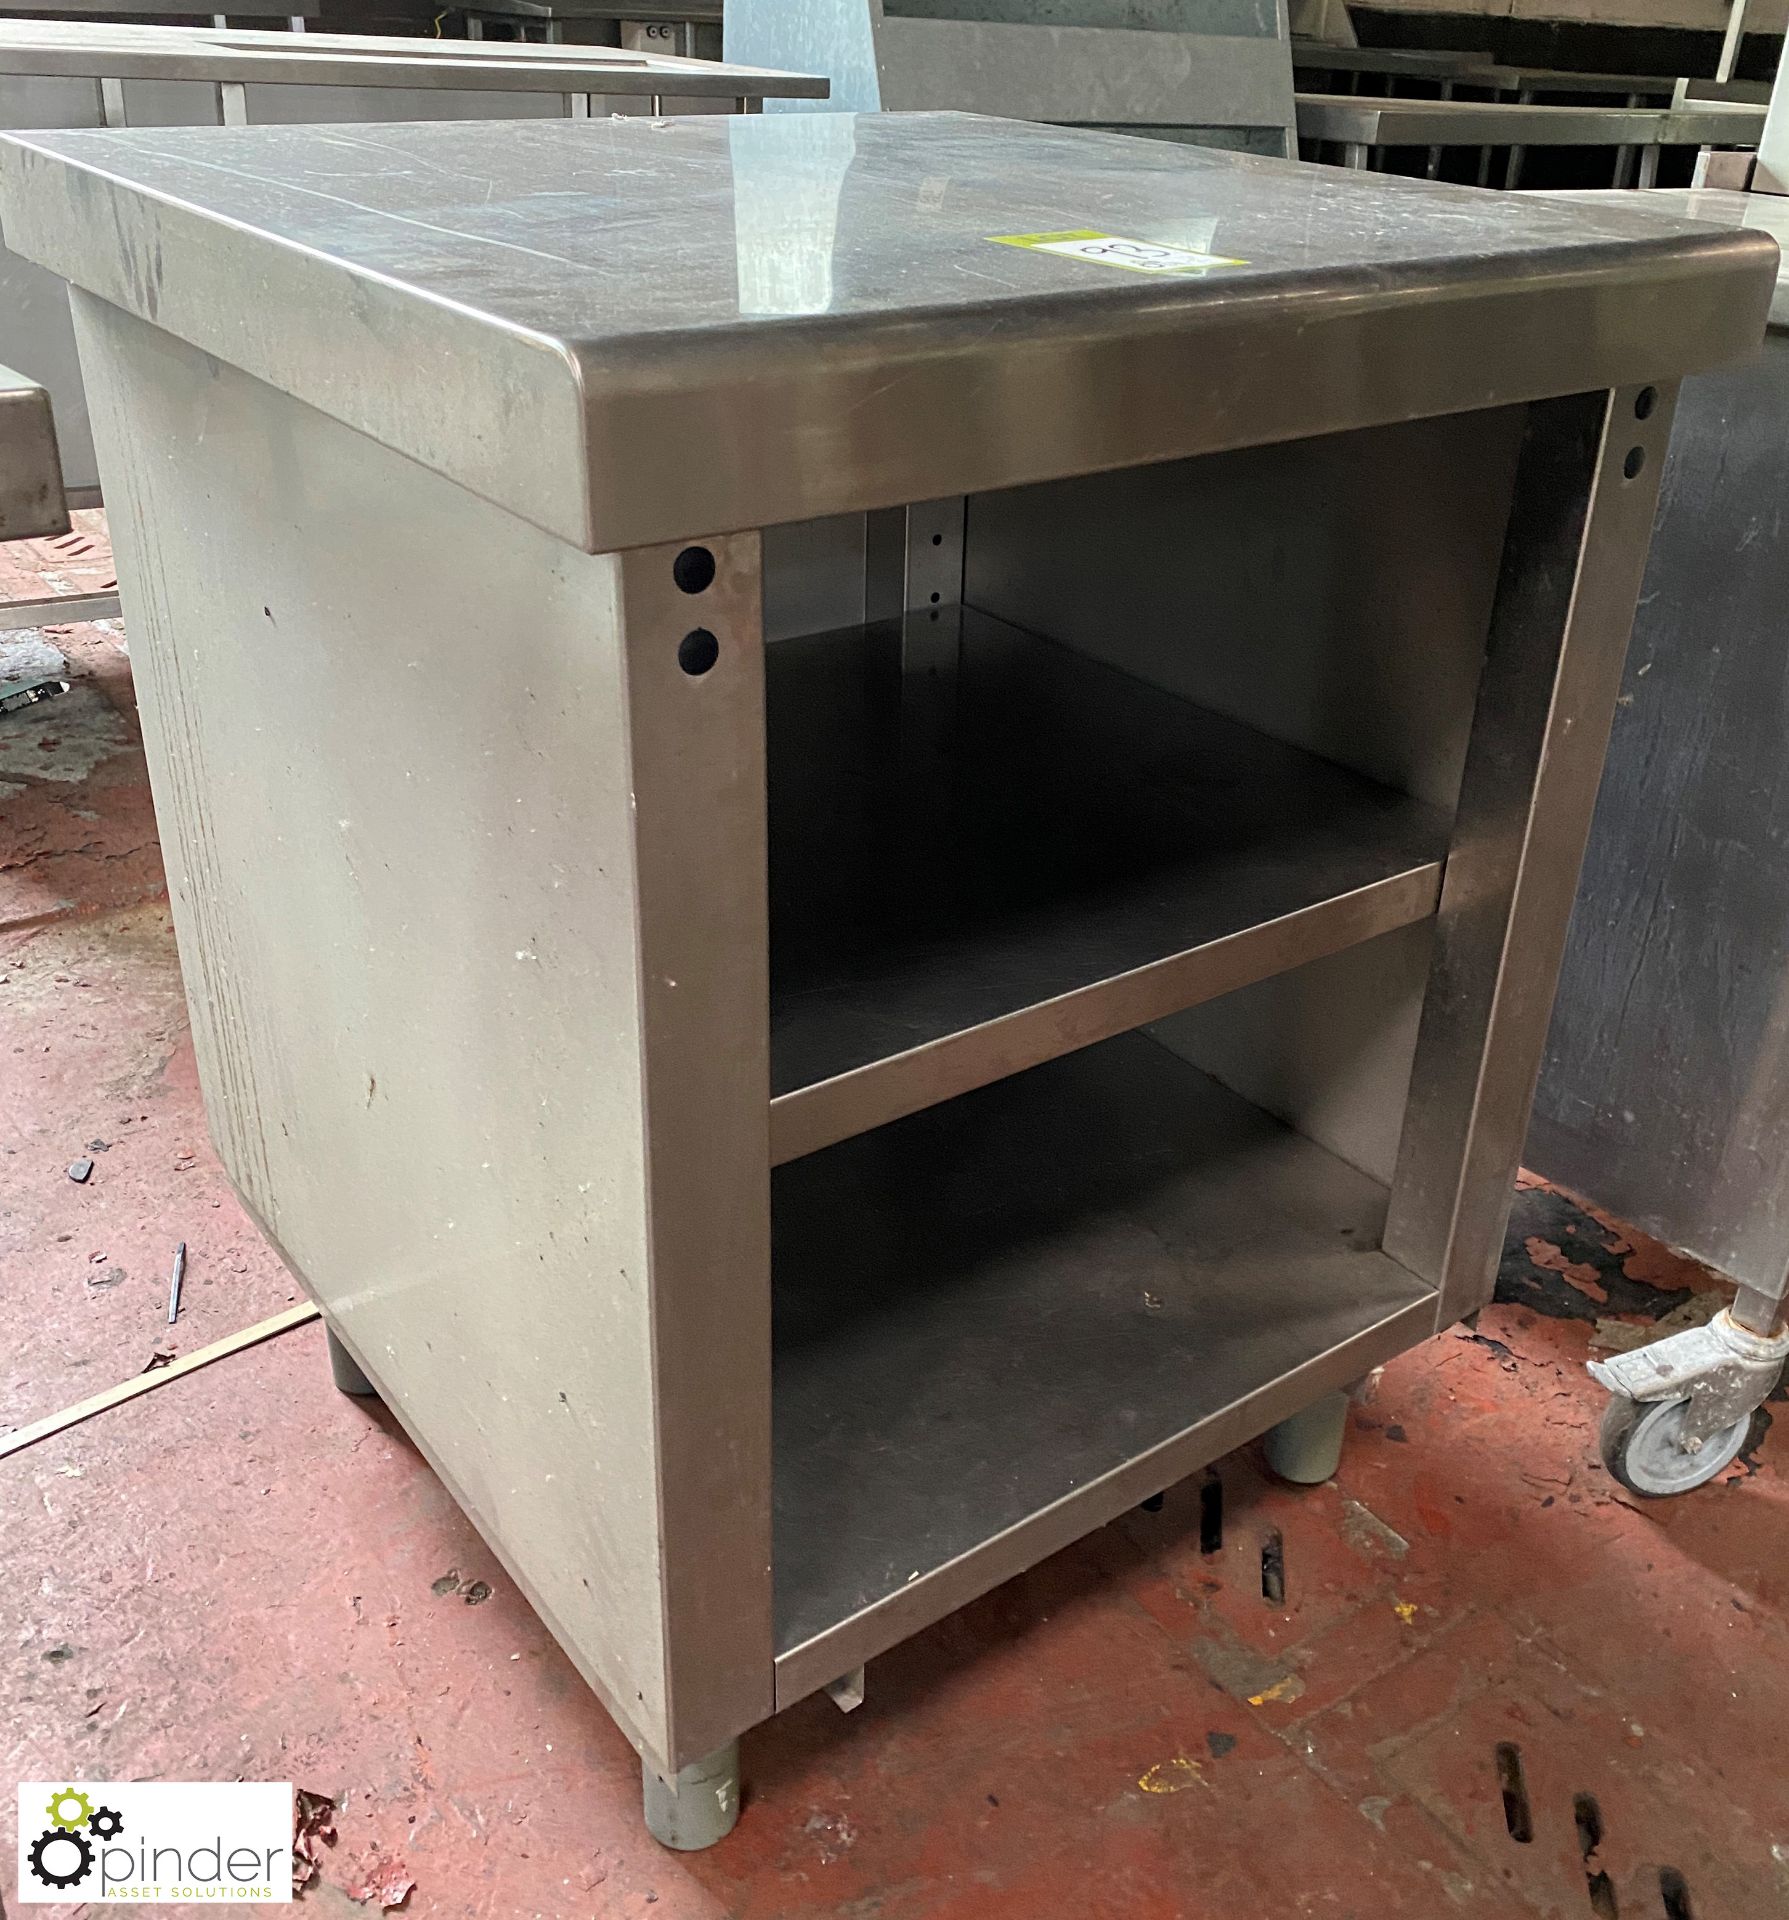 Stainless steel Storage Unit, 725mm x 750mm x 920mm - Image 2 of 3